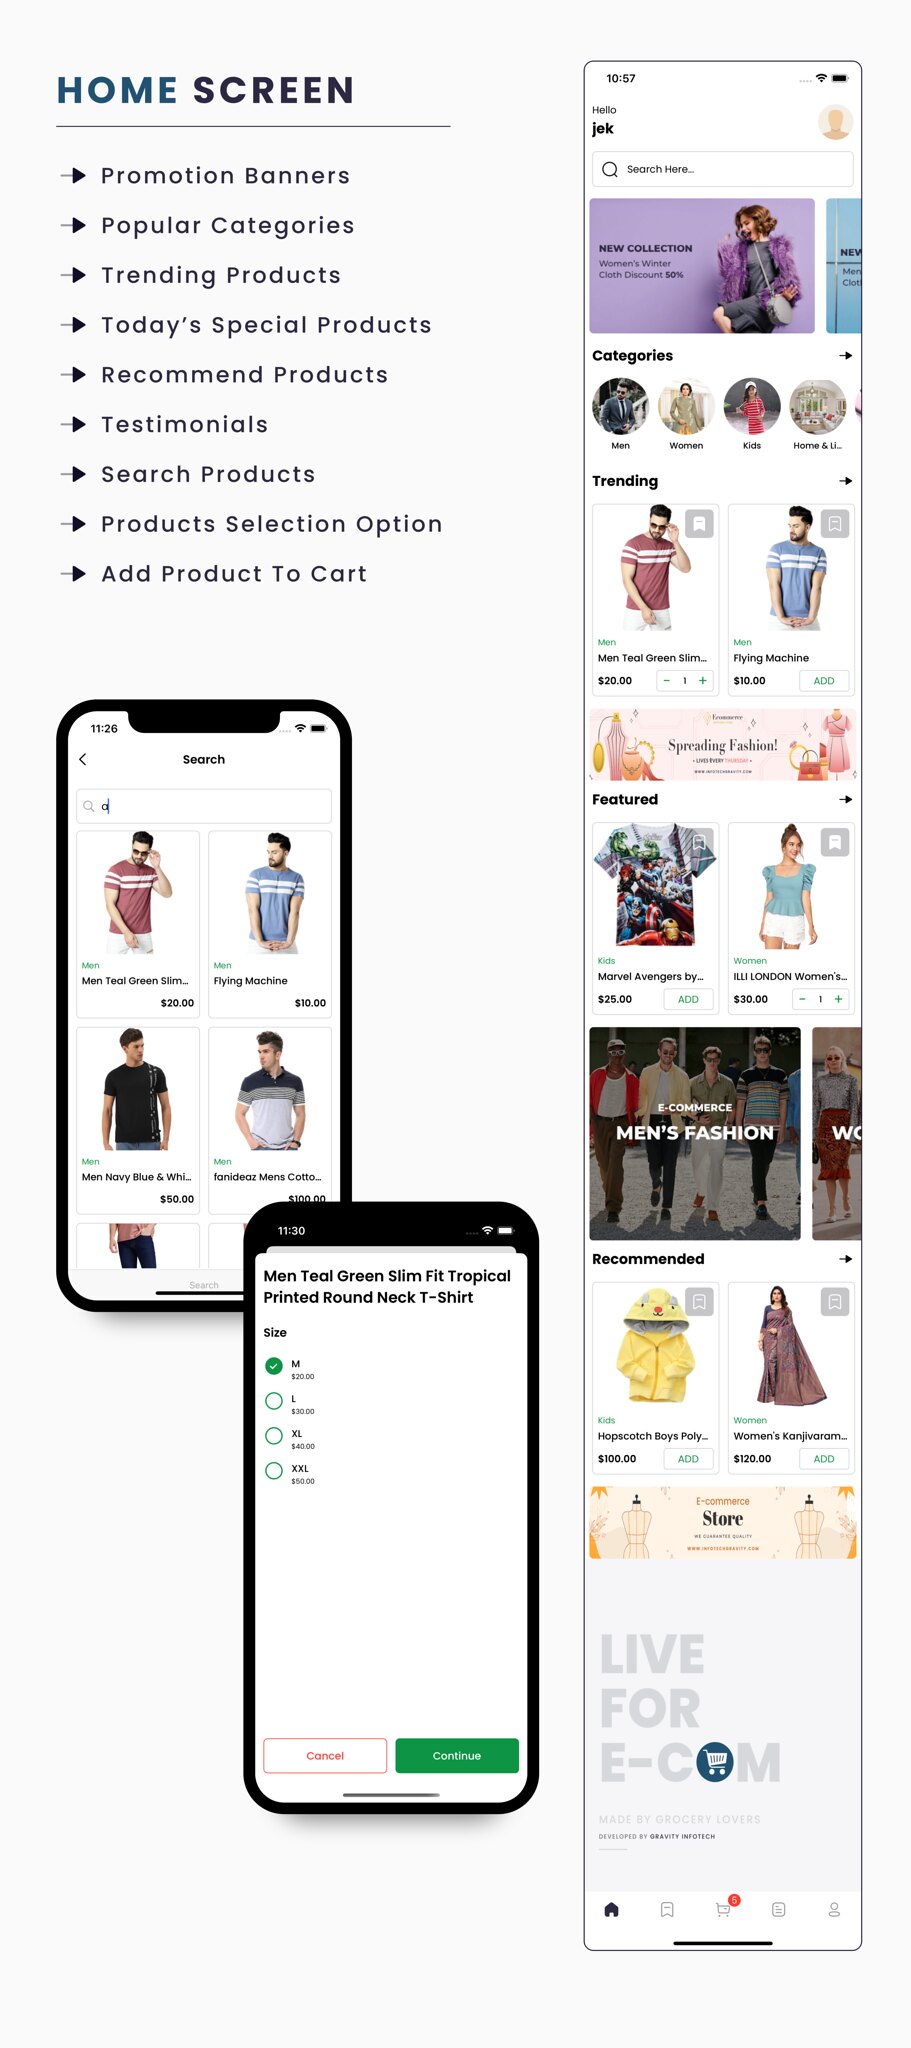 Single vendor eCommerce Android User & Delivery Boy Apps With Backend Admin Panel - 5